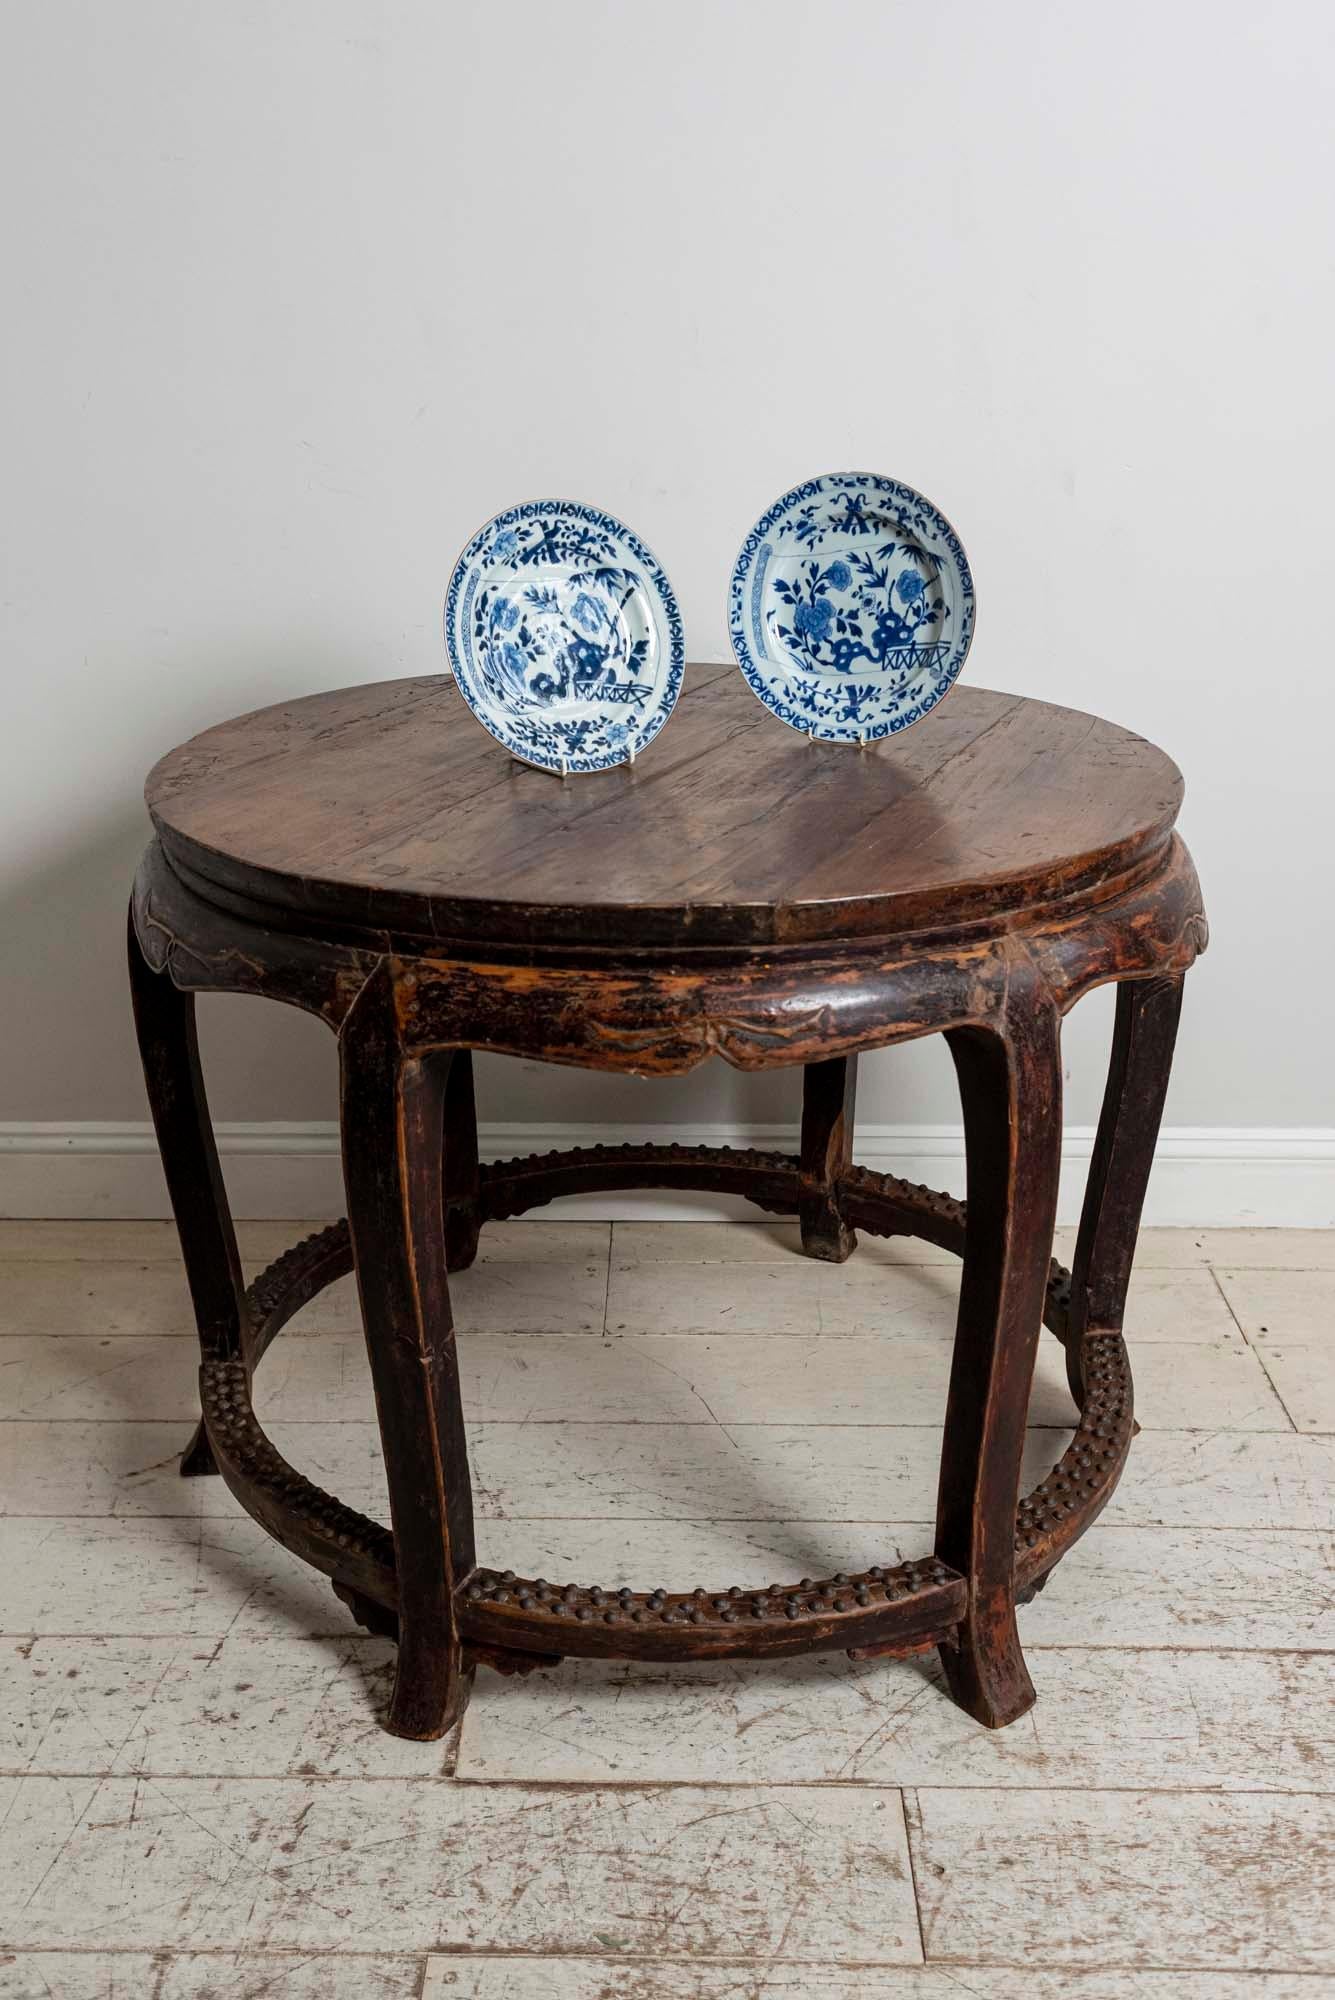 Chinese Qing Dynasty hardwood centre round table,
circa 1820, this handsome table has a solid top with a shaped apron, six legs and an iron studded stretcher at the base.

It is in a simple unrestored condition.